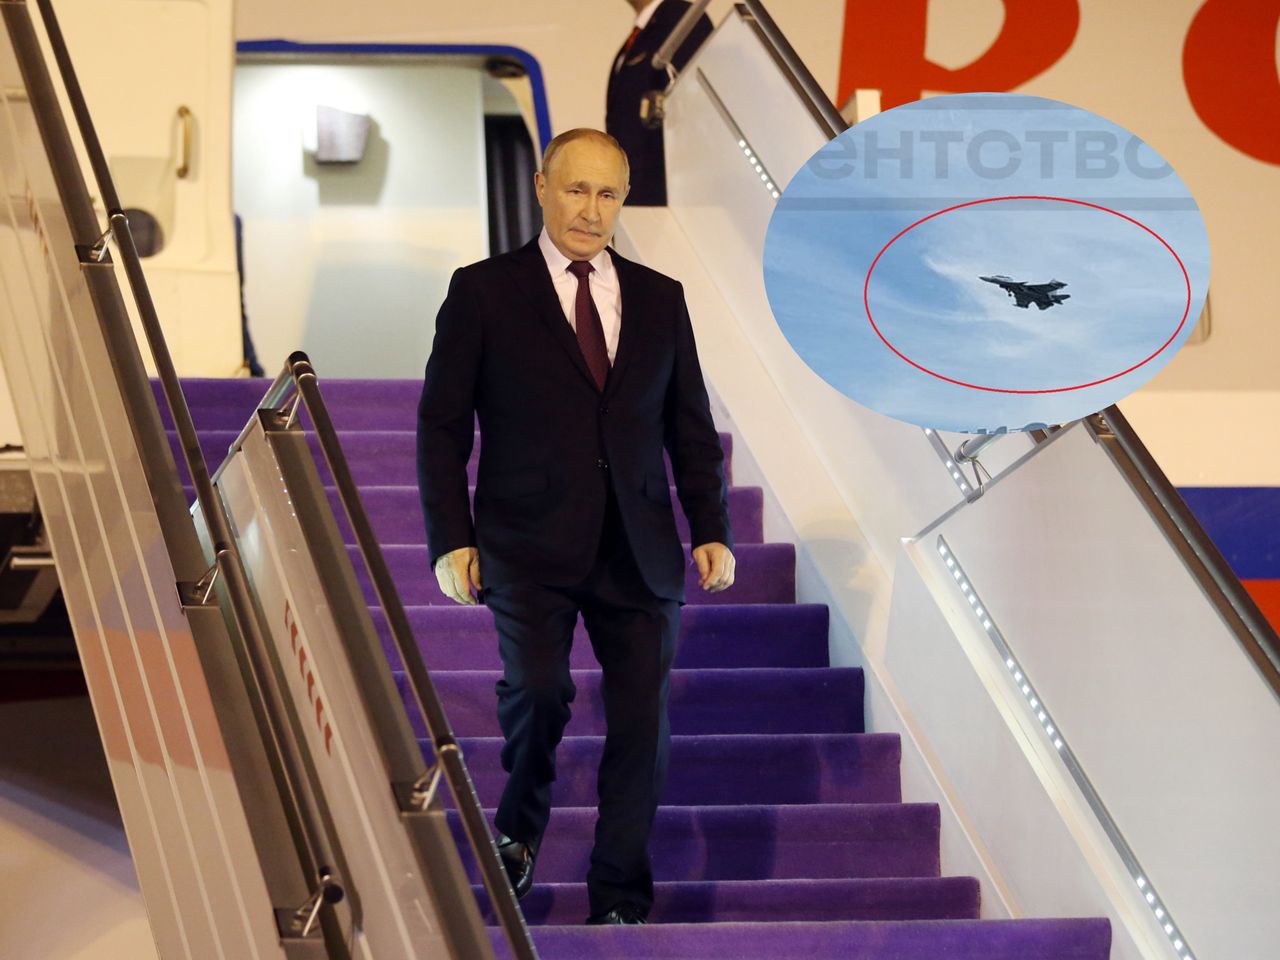 Putin's jet gets fighter escort: Insecurity or national defense?